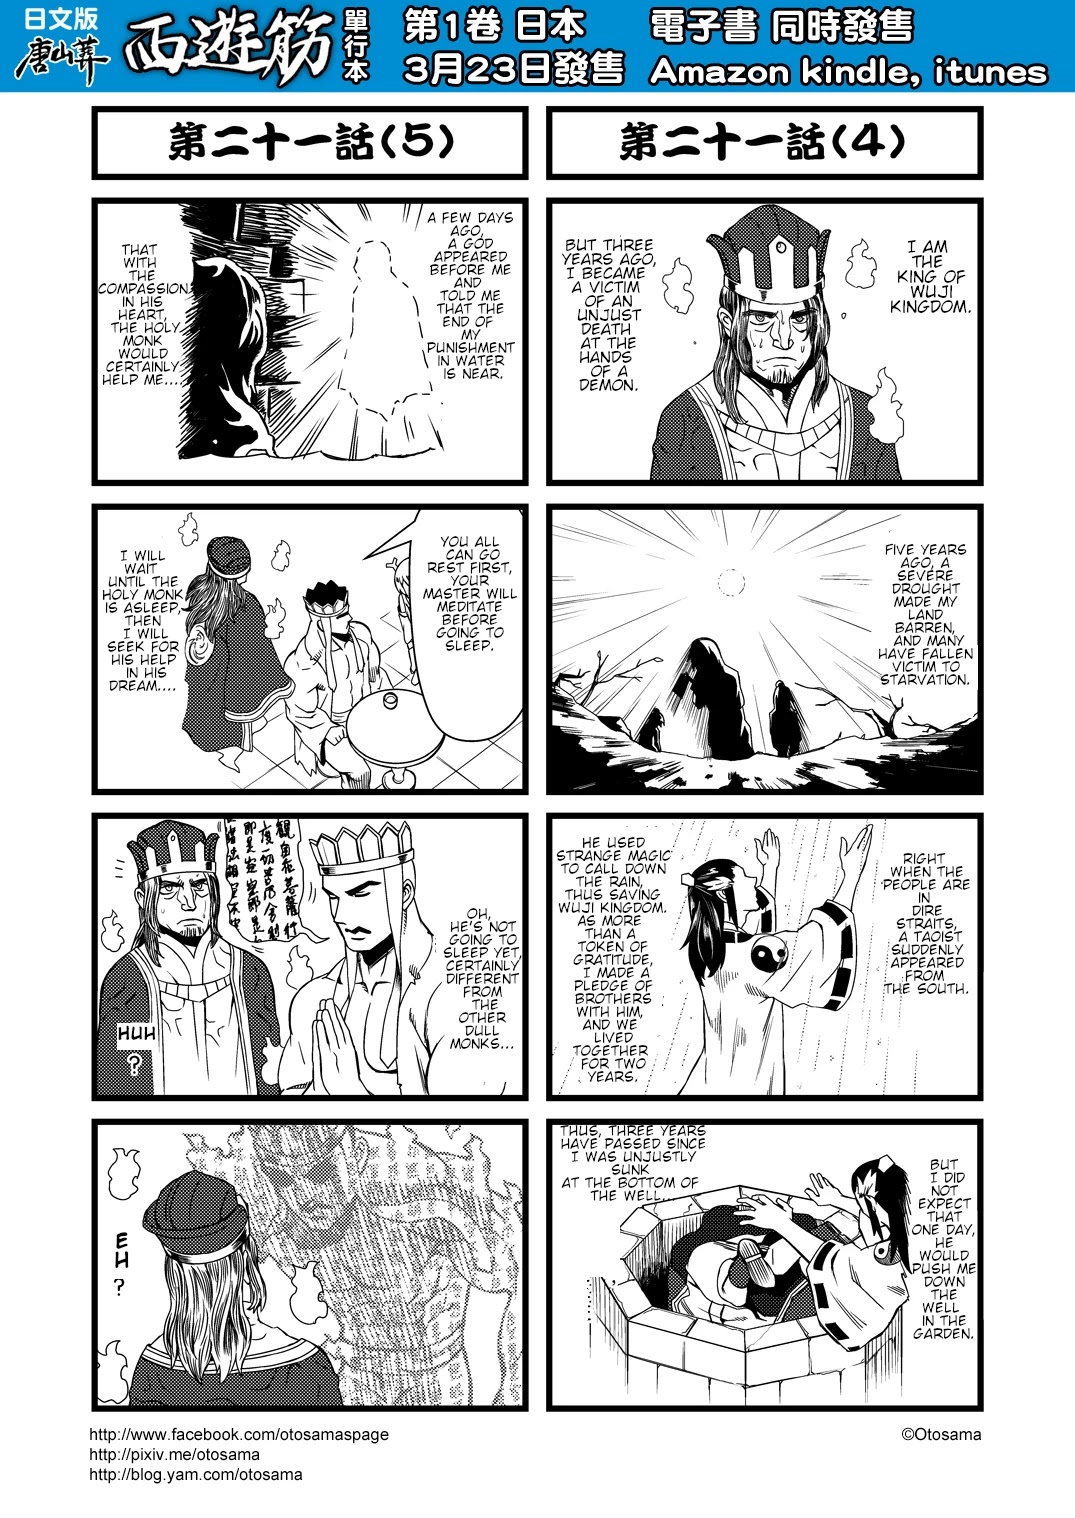 Tang Hill Burial - Journey To The West Irresponsible Anything Goes Edition - Page 3